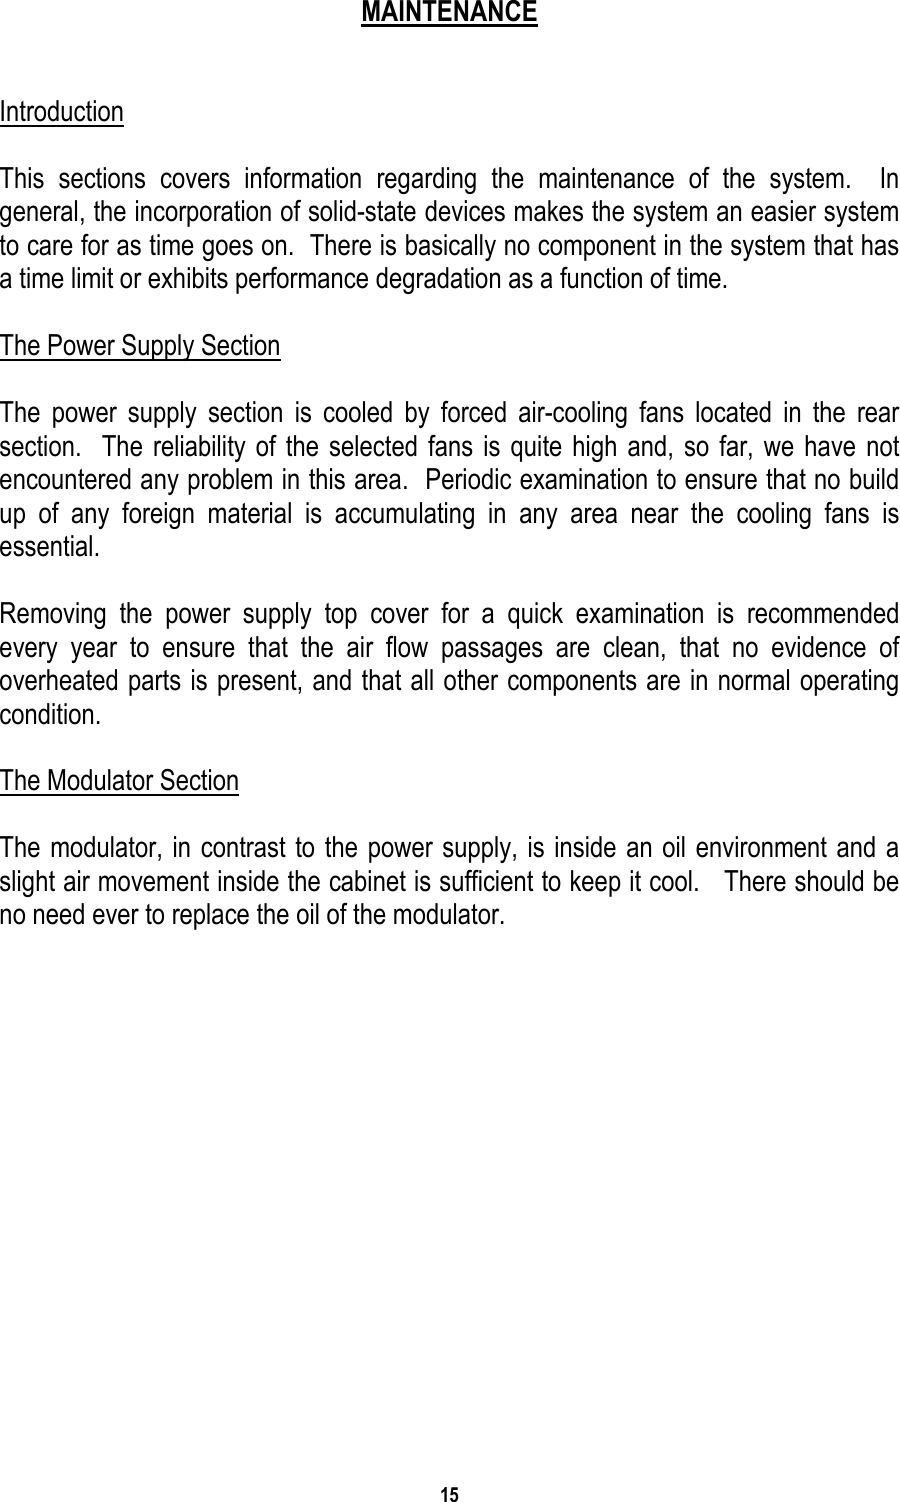 15   MAINTENANCE   Introduction  This sections covers information regarding the maintenance of the system.  In general, the incorporation of solid-state devices makes the system an easier system to care for as time goes on.  There is basically no component in the system that has a time limit or exhibits performance degradation as a function of time.  The Power Supply Section  The power supply section is cooled by forced air-cooling fans located in the rear section.  The reliability of the selected fans is quite high and, so far, we have not encountered any problem in this area.  Periodic examination to ensure that no build up of any foreign material is accumulating in any area near the cooling fans is essential.  Removing the power supply top cover for a quick examination is recommended every year to ensure that the air flow passages are clean, that no evidence of overheated parts is present, and that all other components are in normal operating condition.  The Modulator Section  The modulator, in contrast to the power supply, is inside an oil environment and a slight air movement inside the cabinet is sufficient to keep it cool.   There should be no need ever to replace the oil of the modulator.             